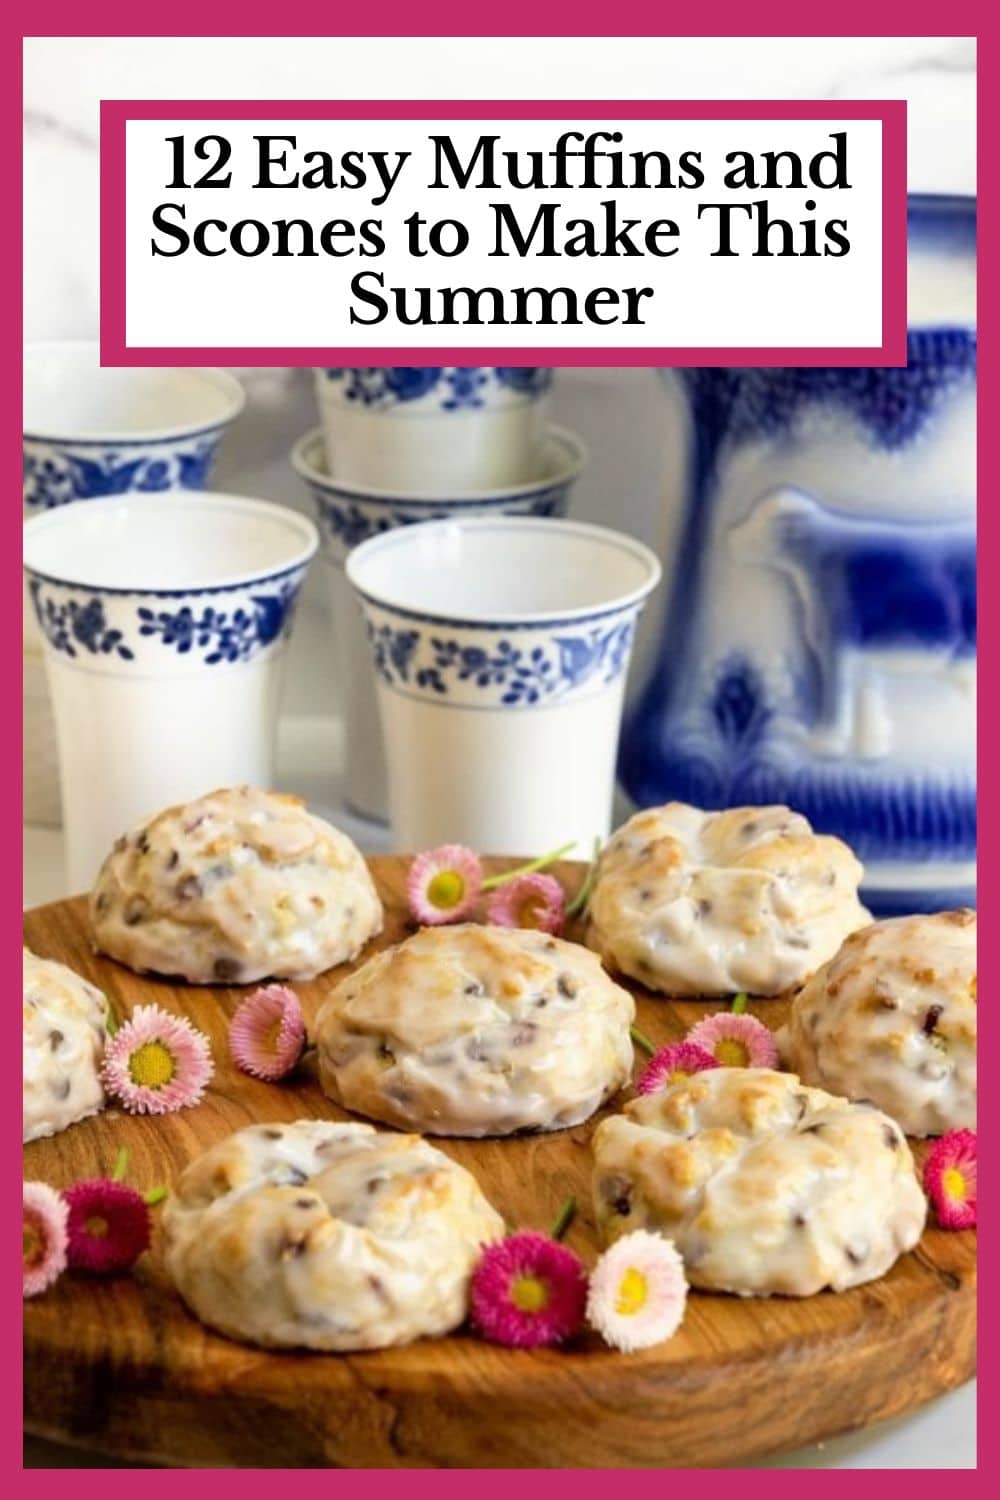 12 Summery, One-Bowl Muffin and Scone Recipes